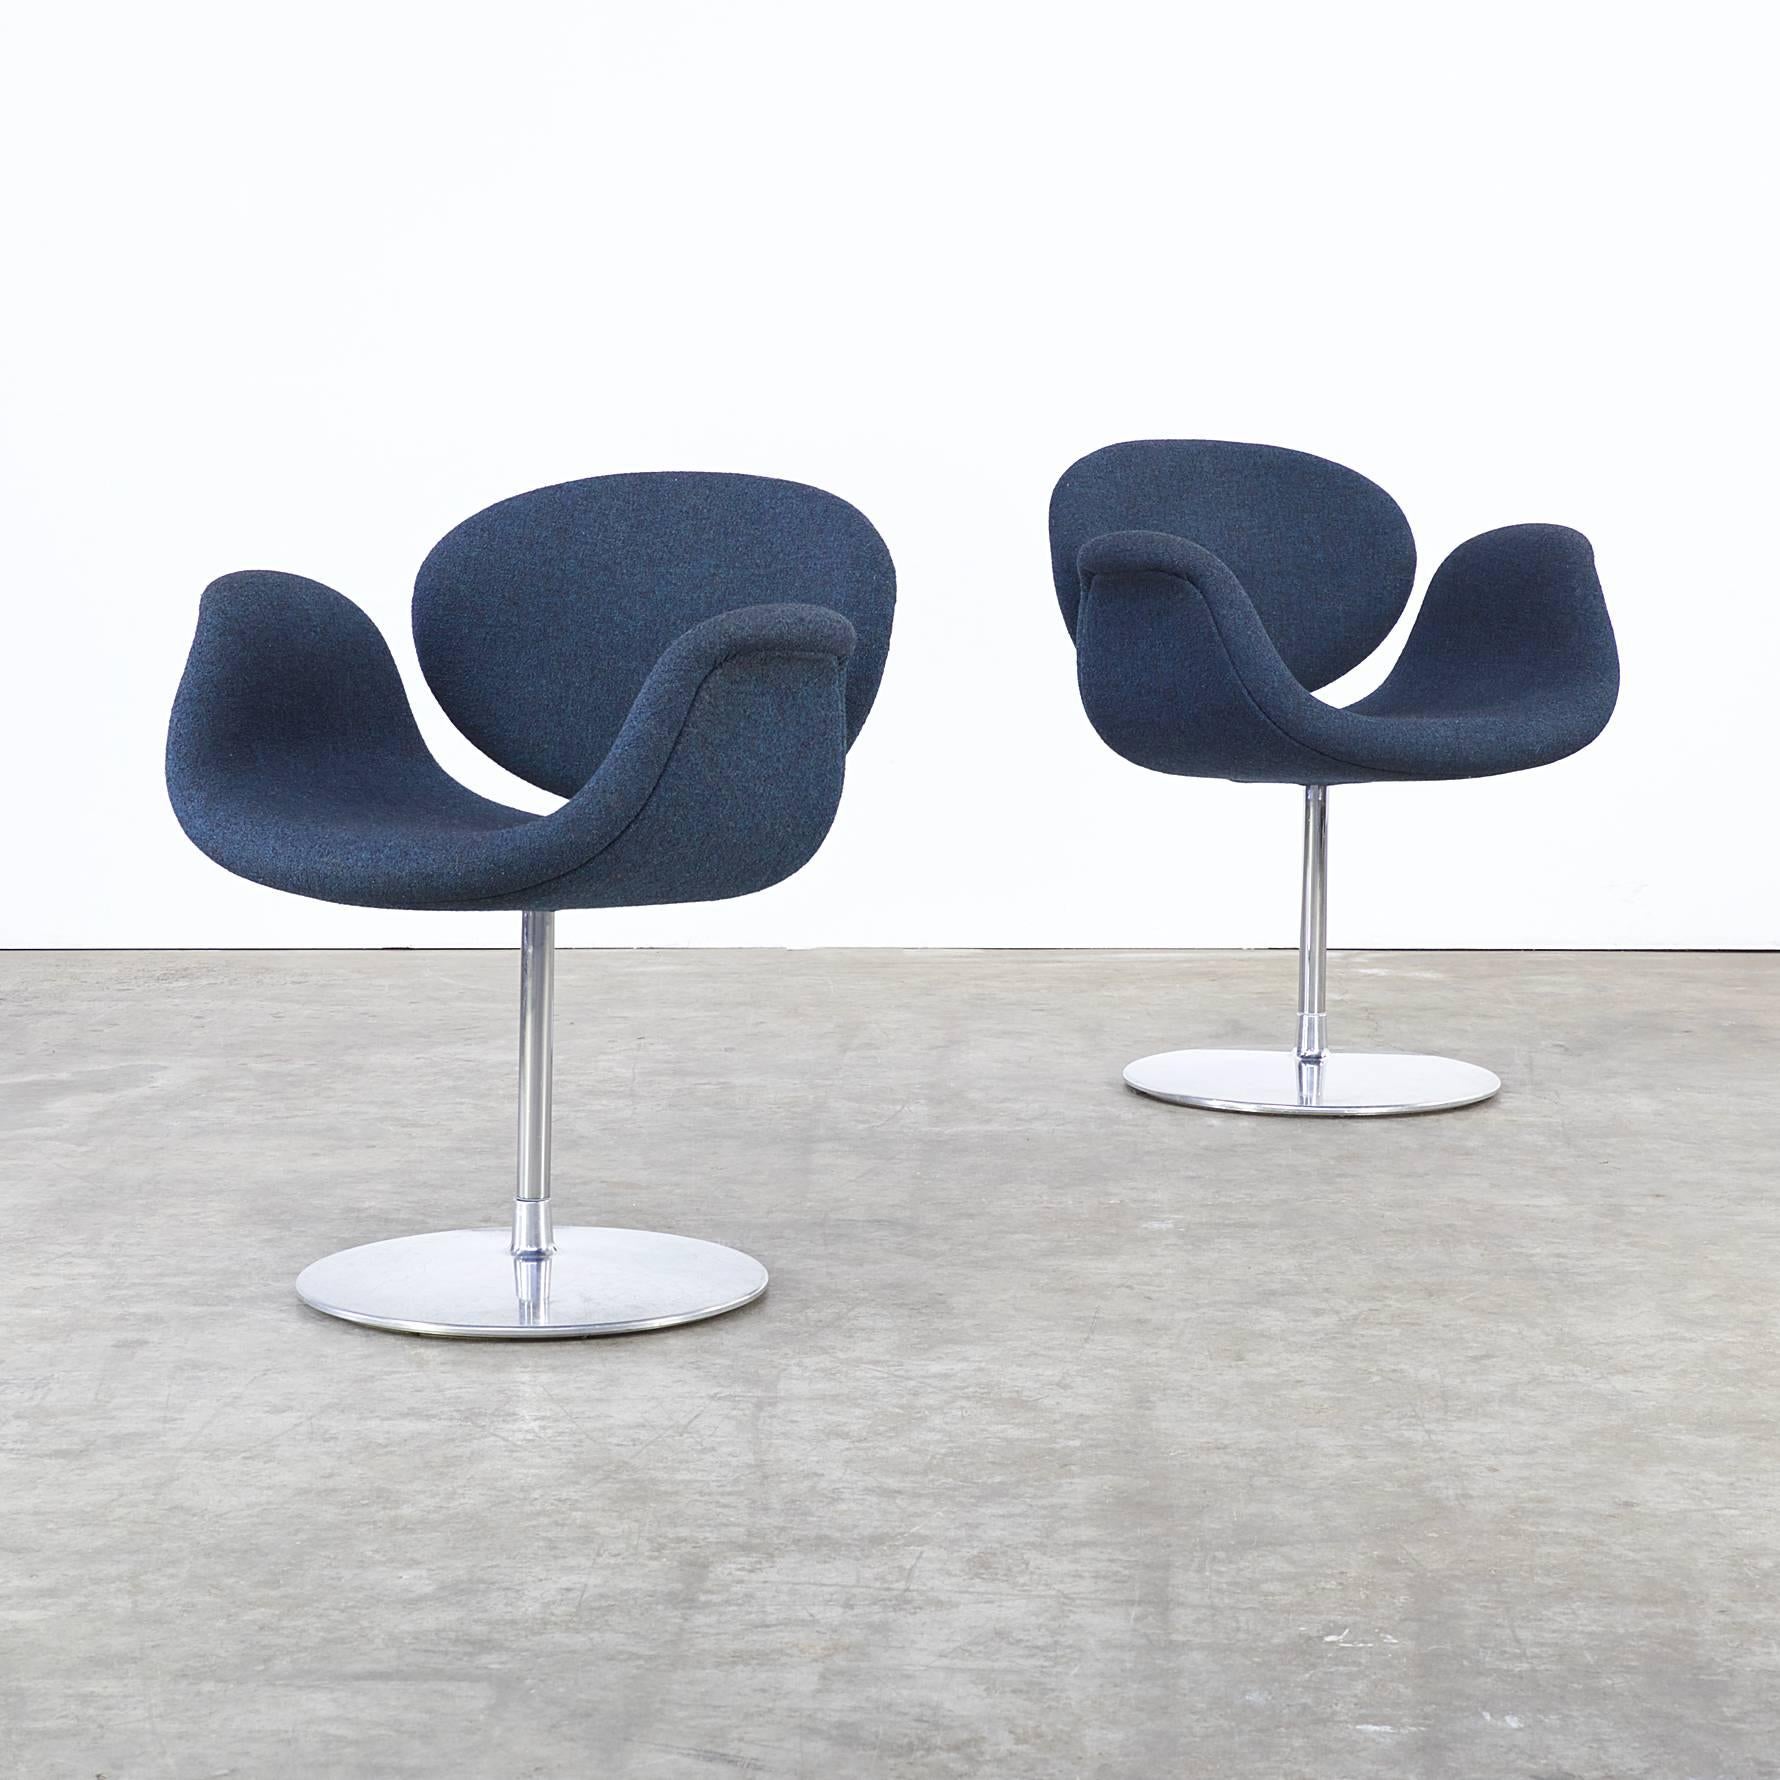 One set of two Pierre Paulin F163 little Tulip fauteuils for Artifort. Good condition, blue grey fabric. Chrome foot. Wear consistent with age and use. Dimensions: 70 cm (W) x 53 cm (D) x 77cm (H) x 42cm seat height.